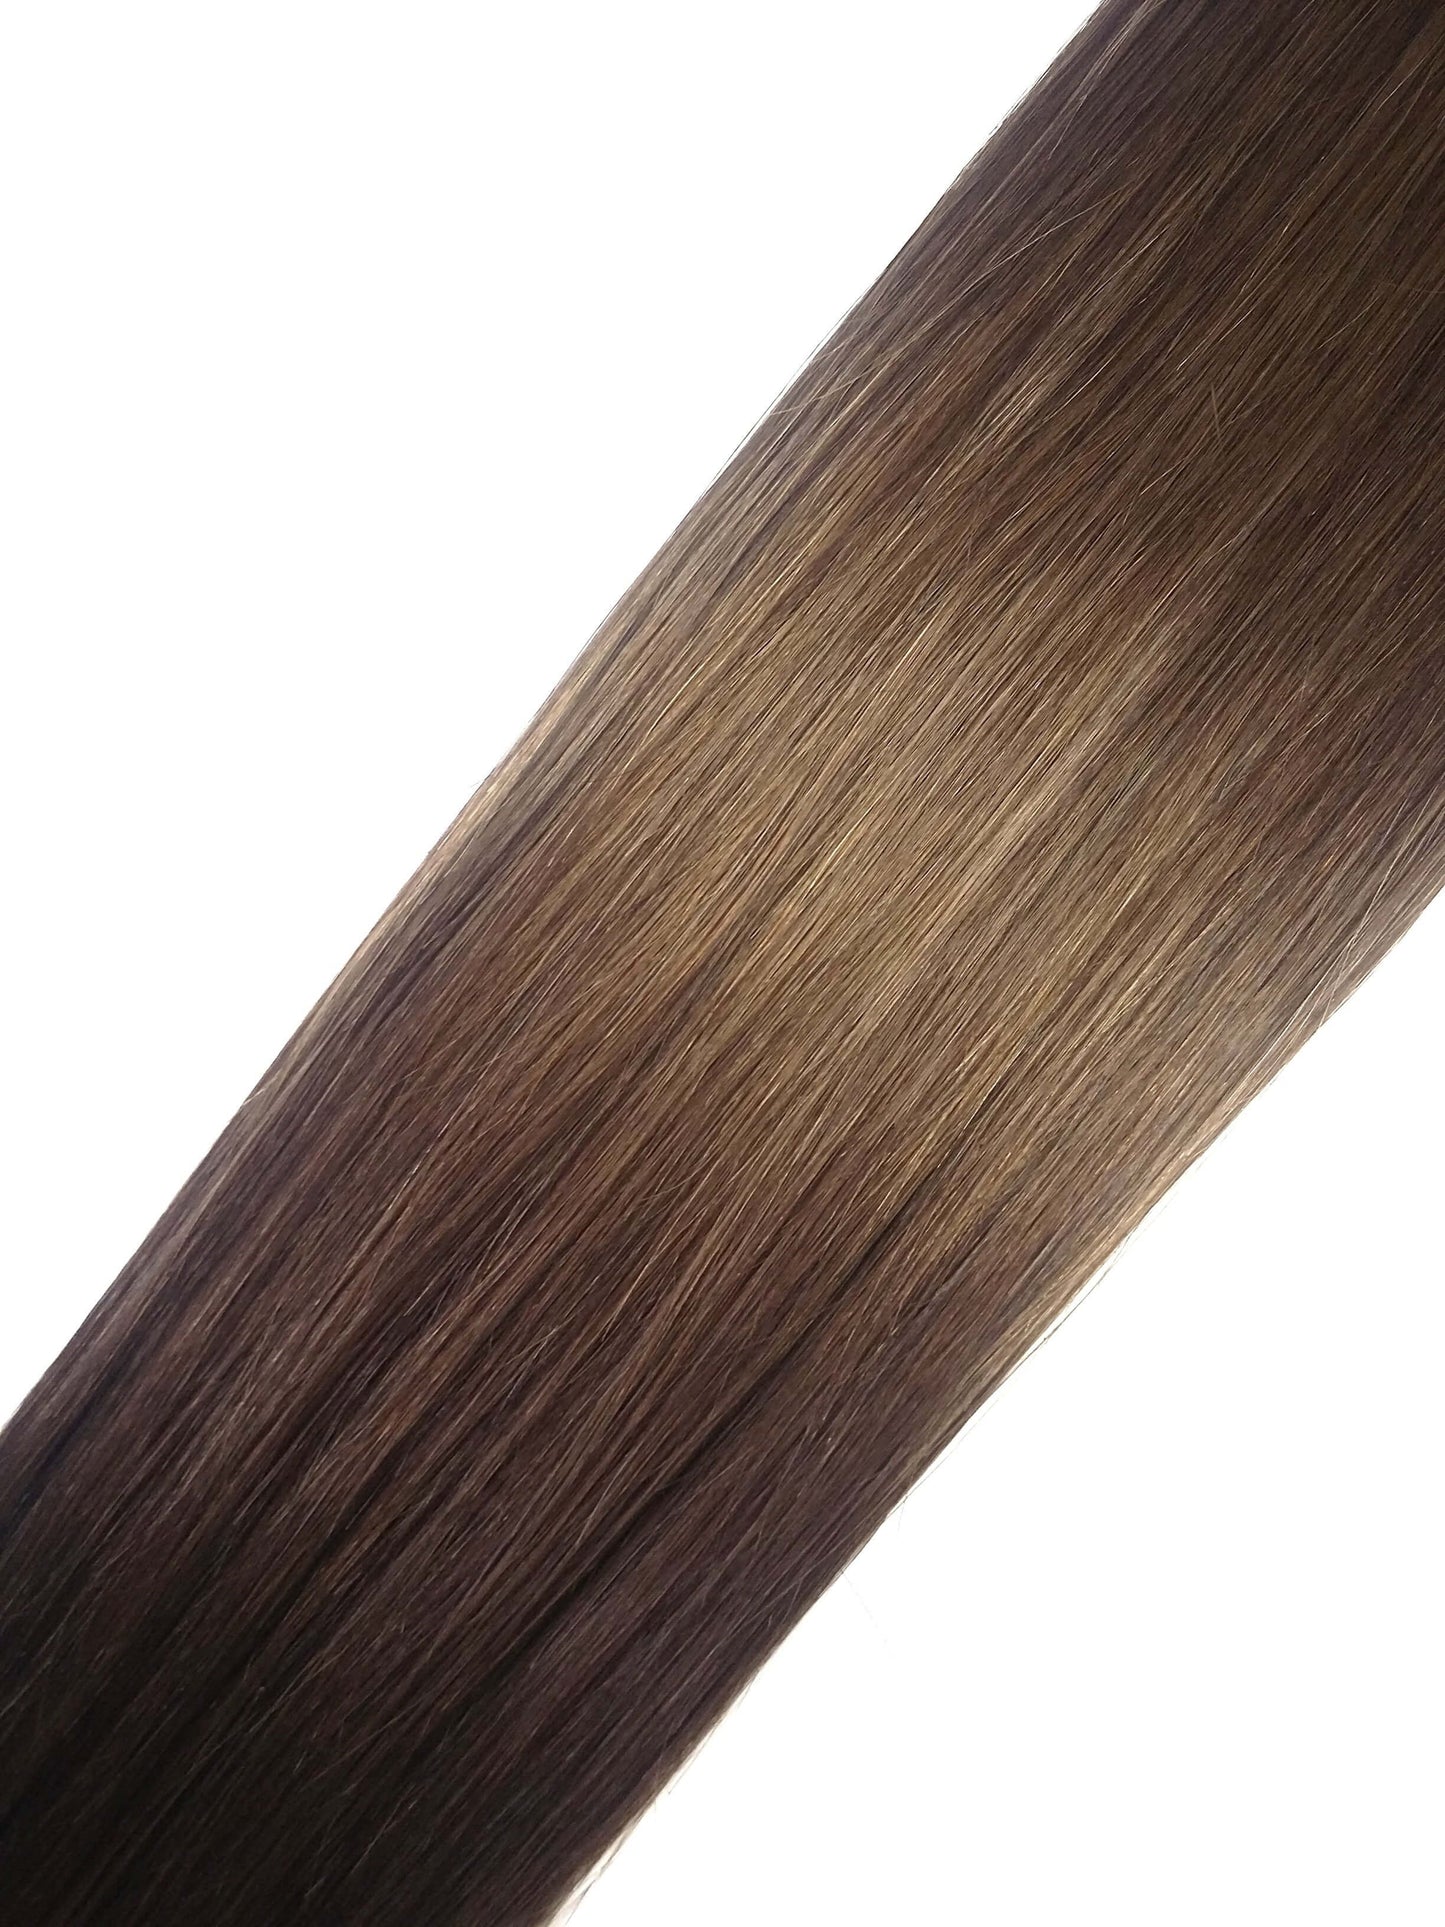 Brazilian Virgin Remy Human Hair - Wefts, 20'',Straight, Colour 4, 100g, Quick Shipping